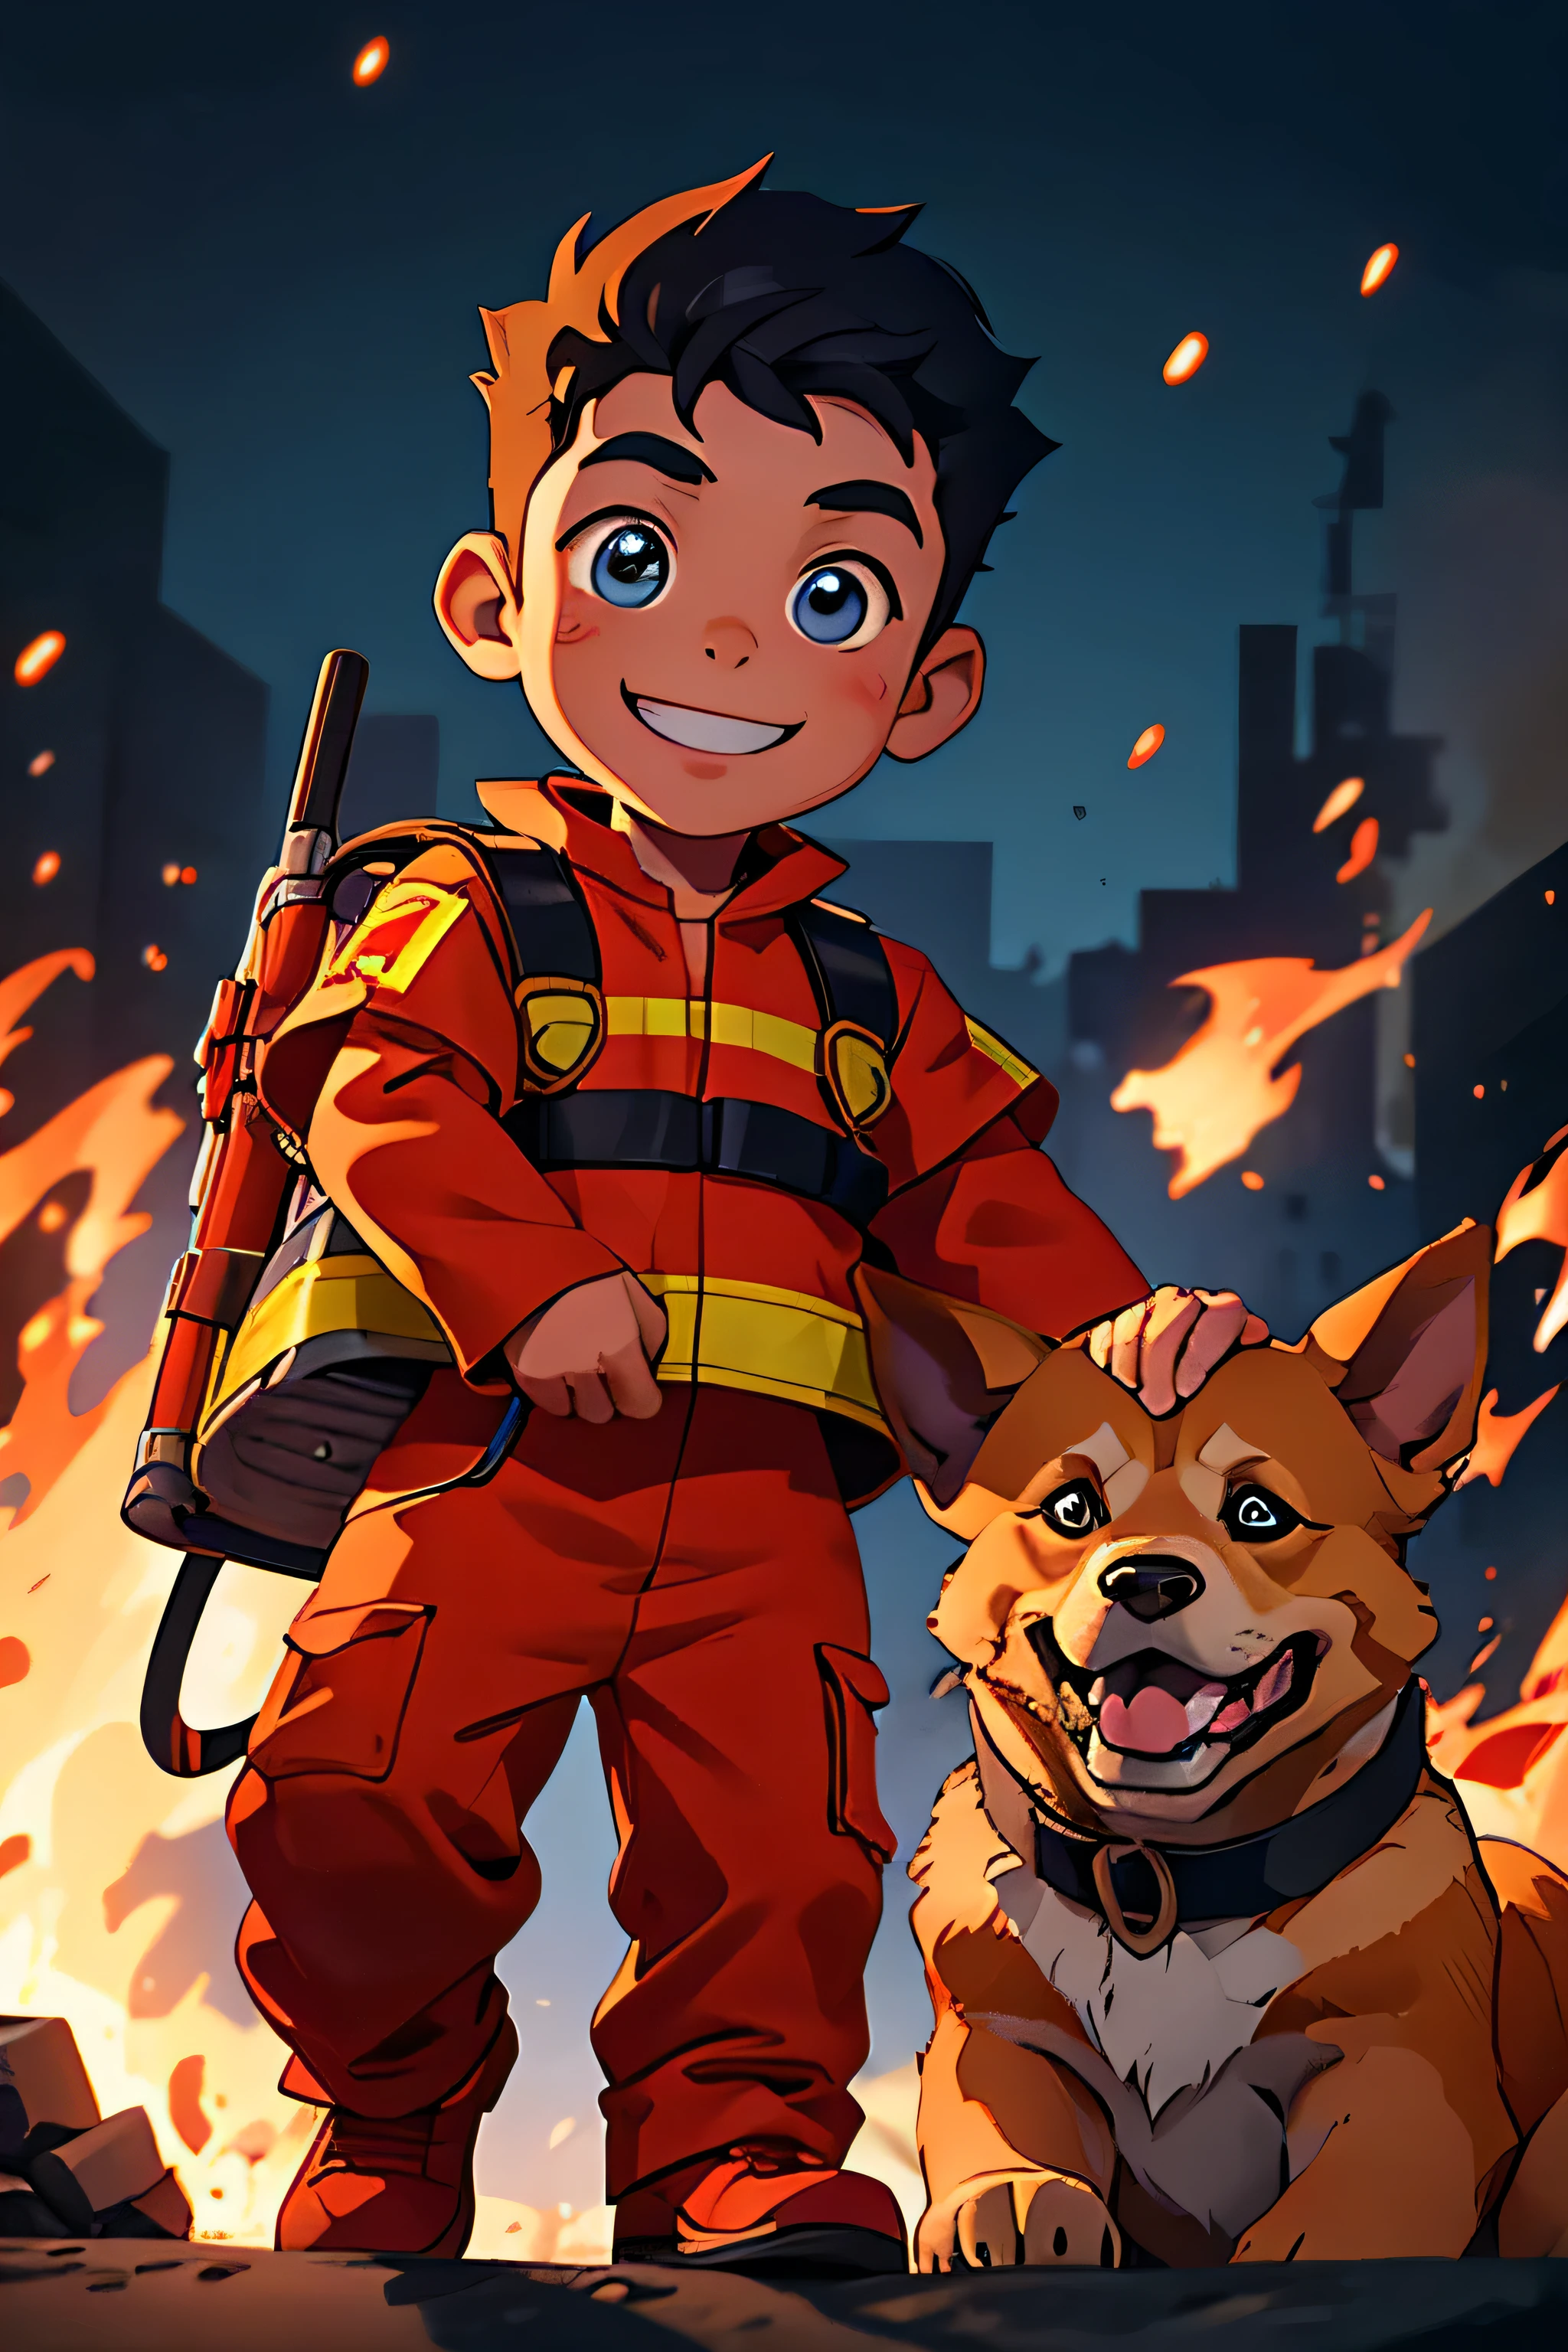 an animated image of a boy named alex a 7 years of age with a fire fighter costume with a smiling face who is ready to rescue a dog from a fire outbreak